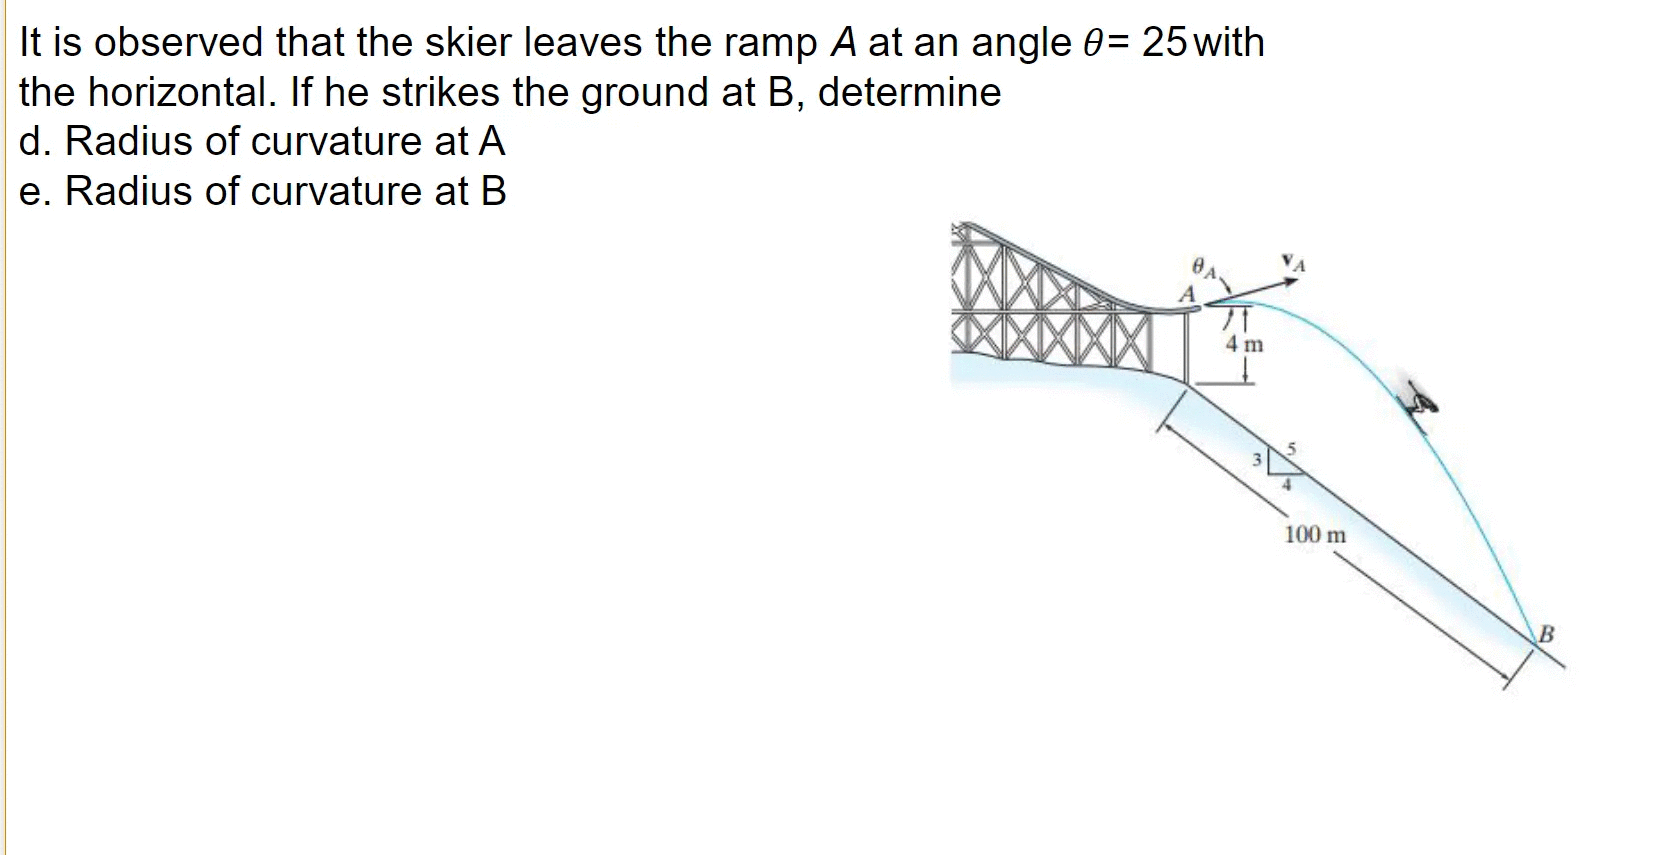 It is observed that the skier leaves the ramp A at an angle 0= 25with
the horizontal. If he strikes the ground at B, determine
d. Radius of curvature at A
e. Radius of curvature at B
4 m
100 m
